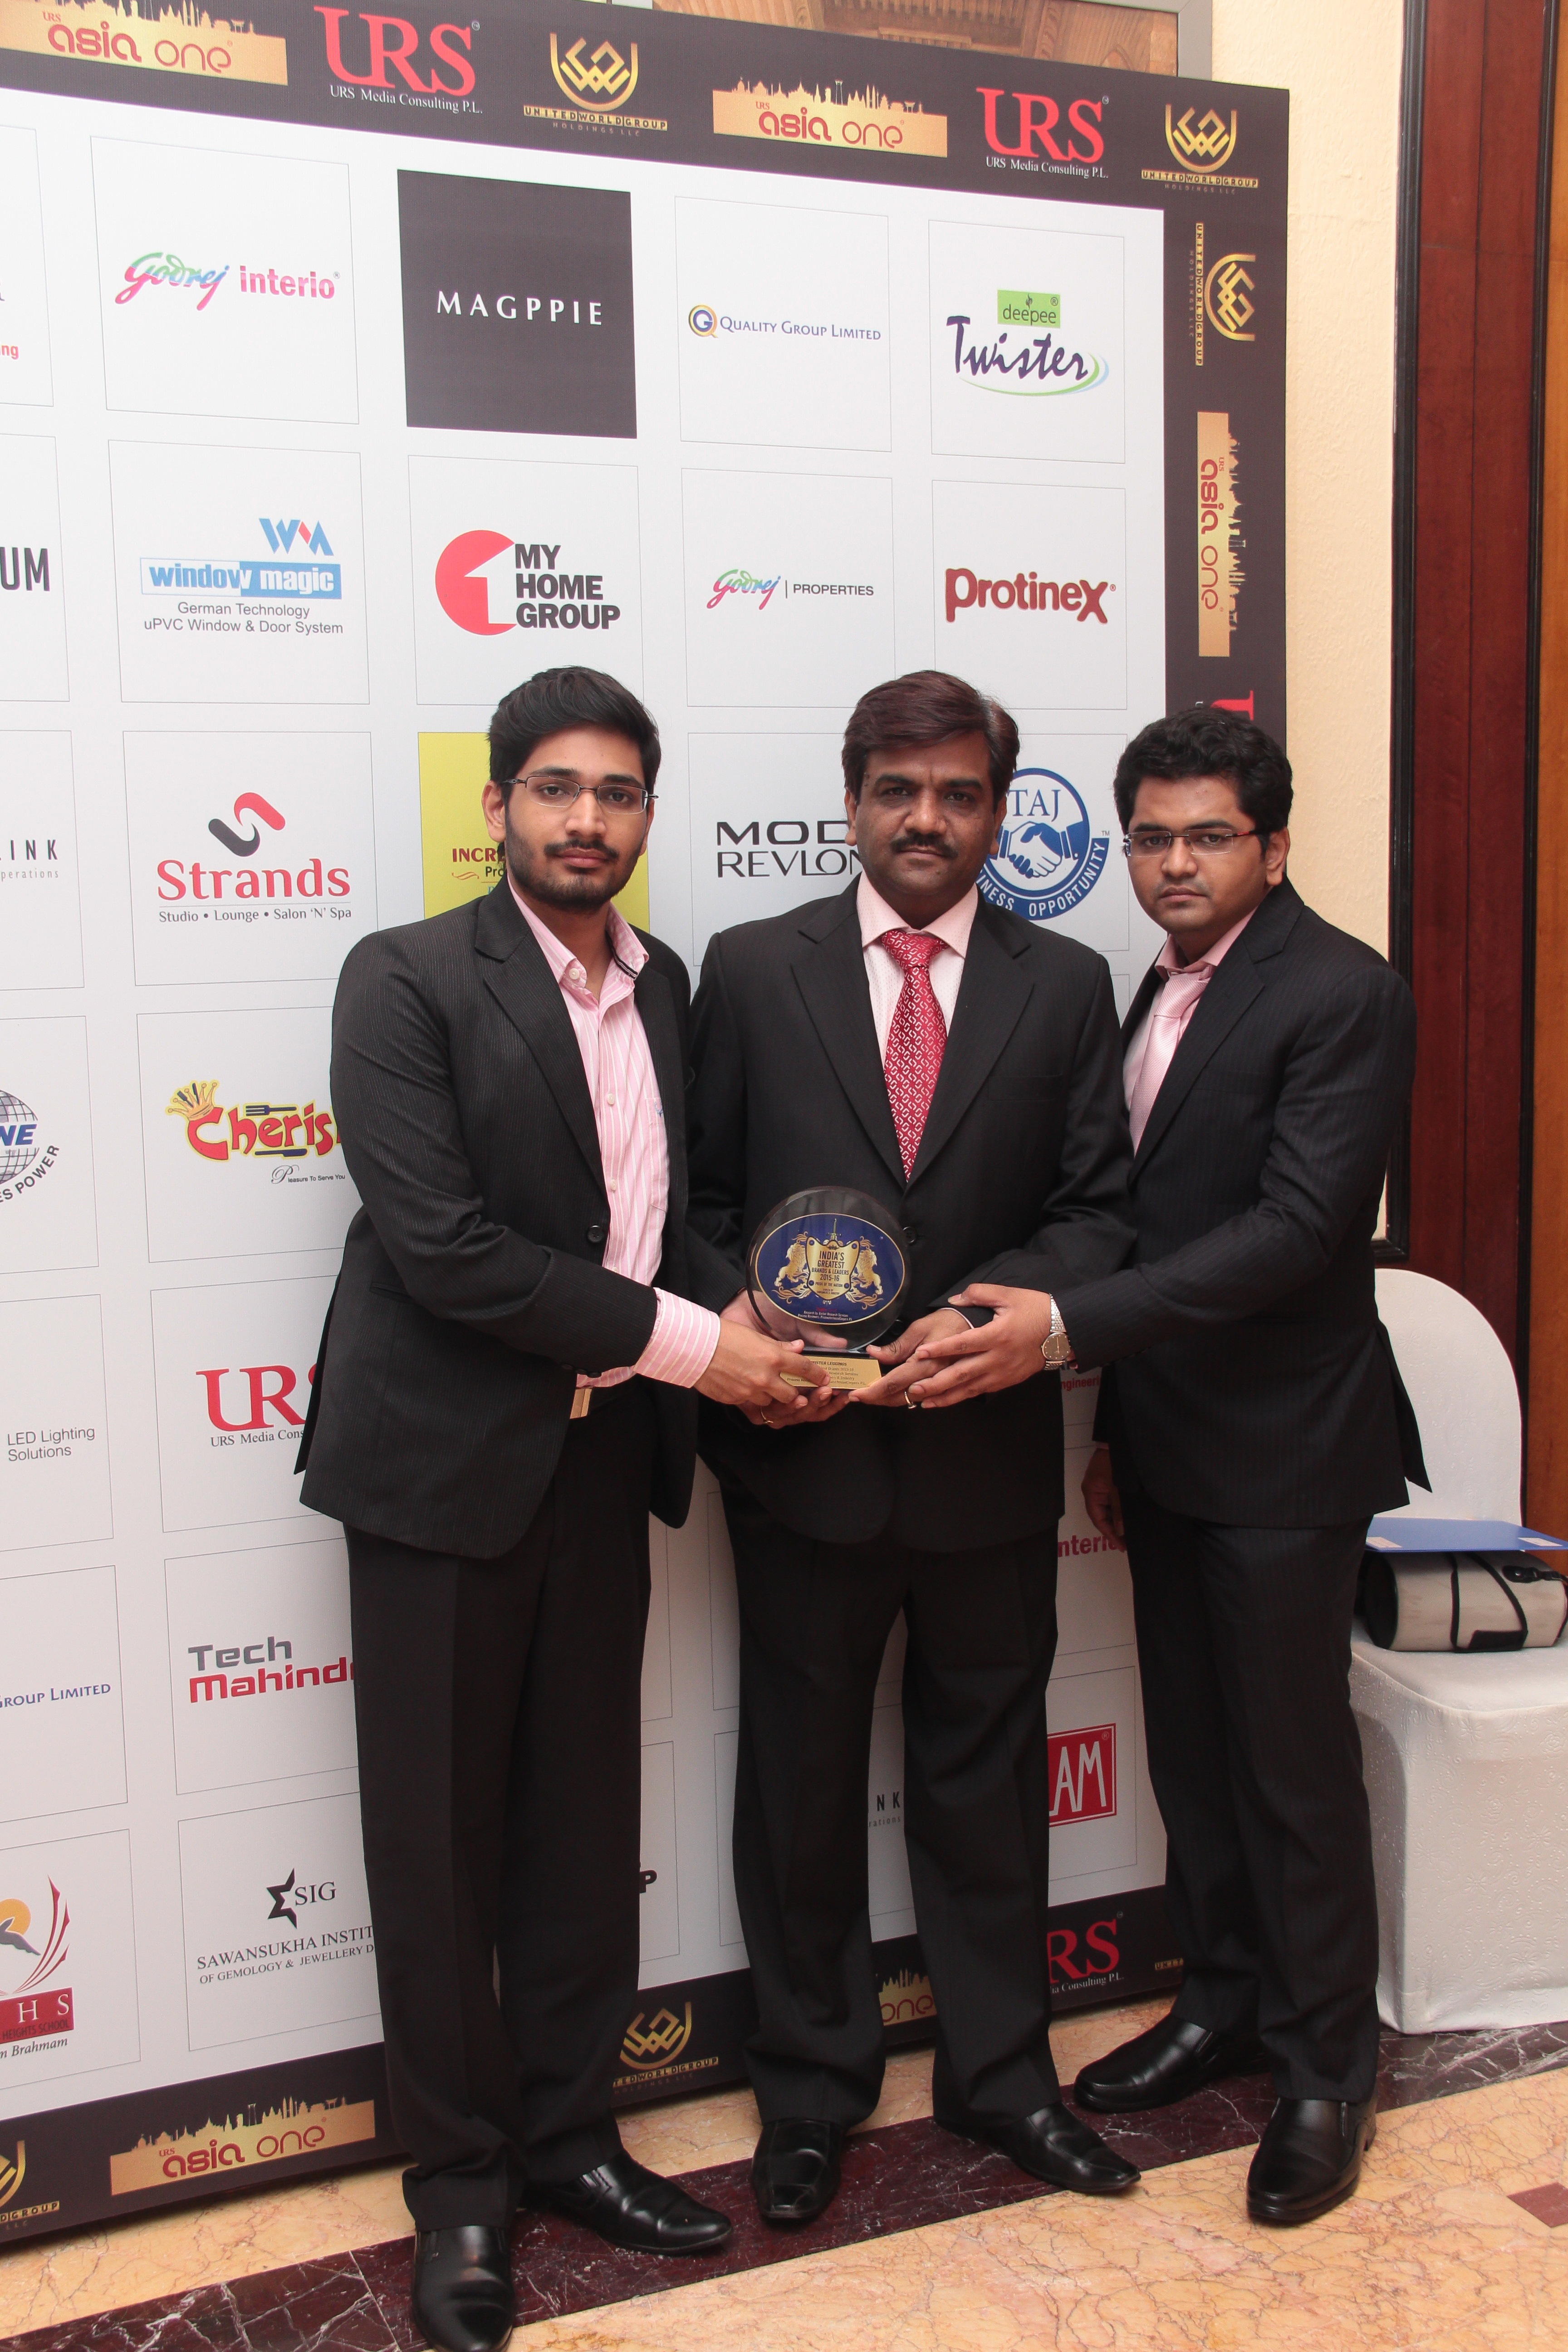 Deepe is India's Greatest Brand 2015-2016